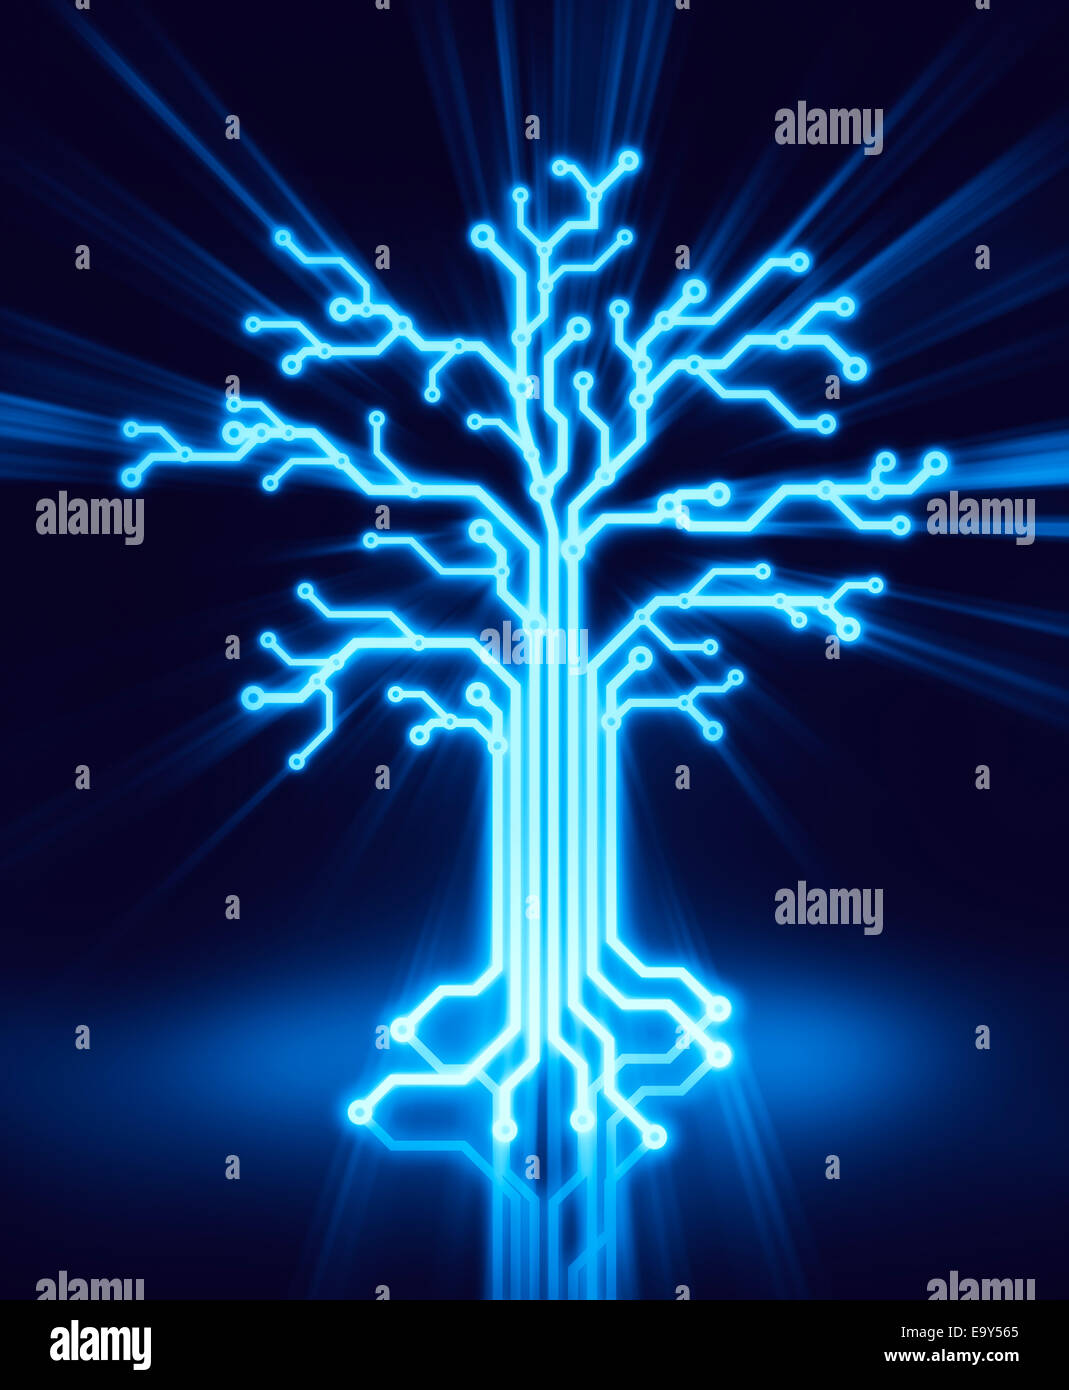 Digital tree made of glowing blue circuits, conceptual illustration on black background Stock Photo